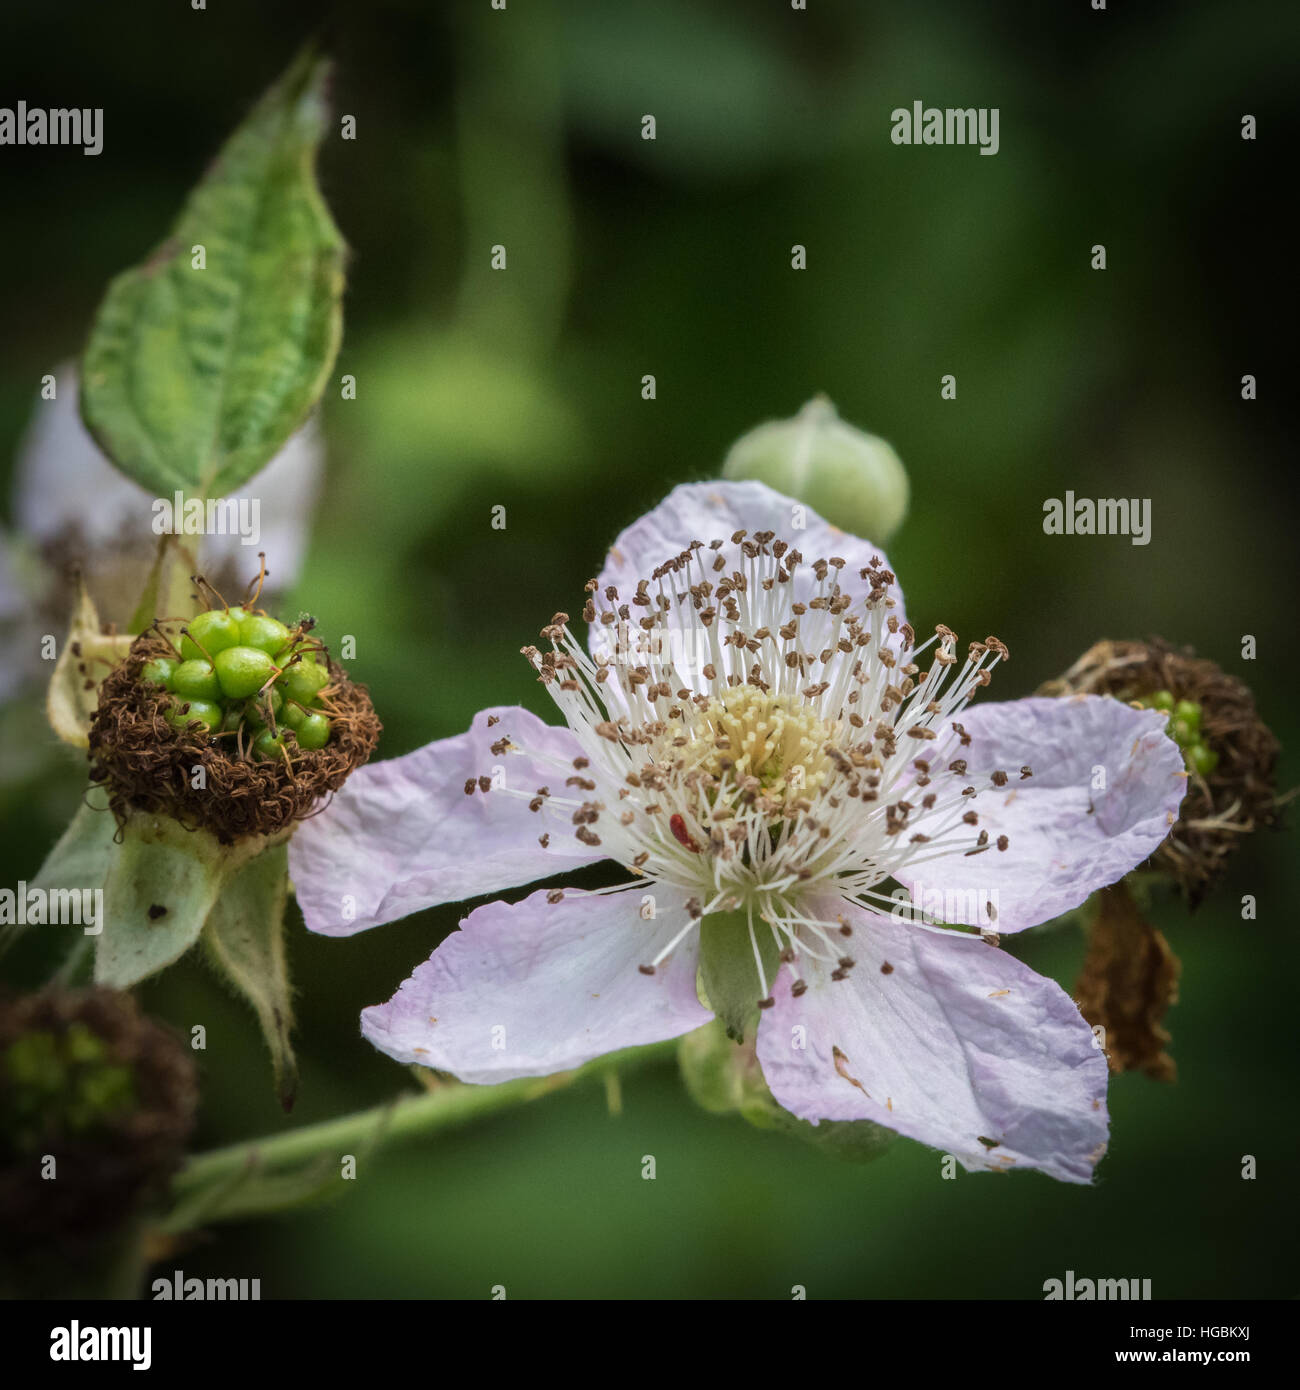 Blackberry Flower and Forming Fruit Stock Photo